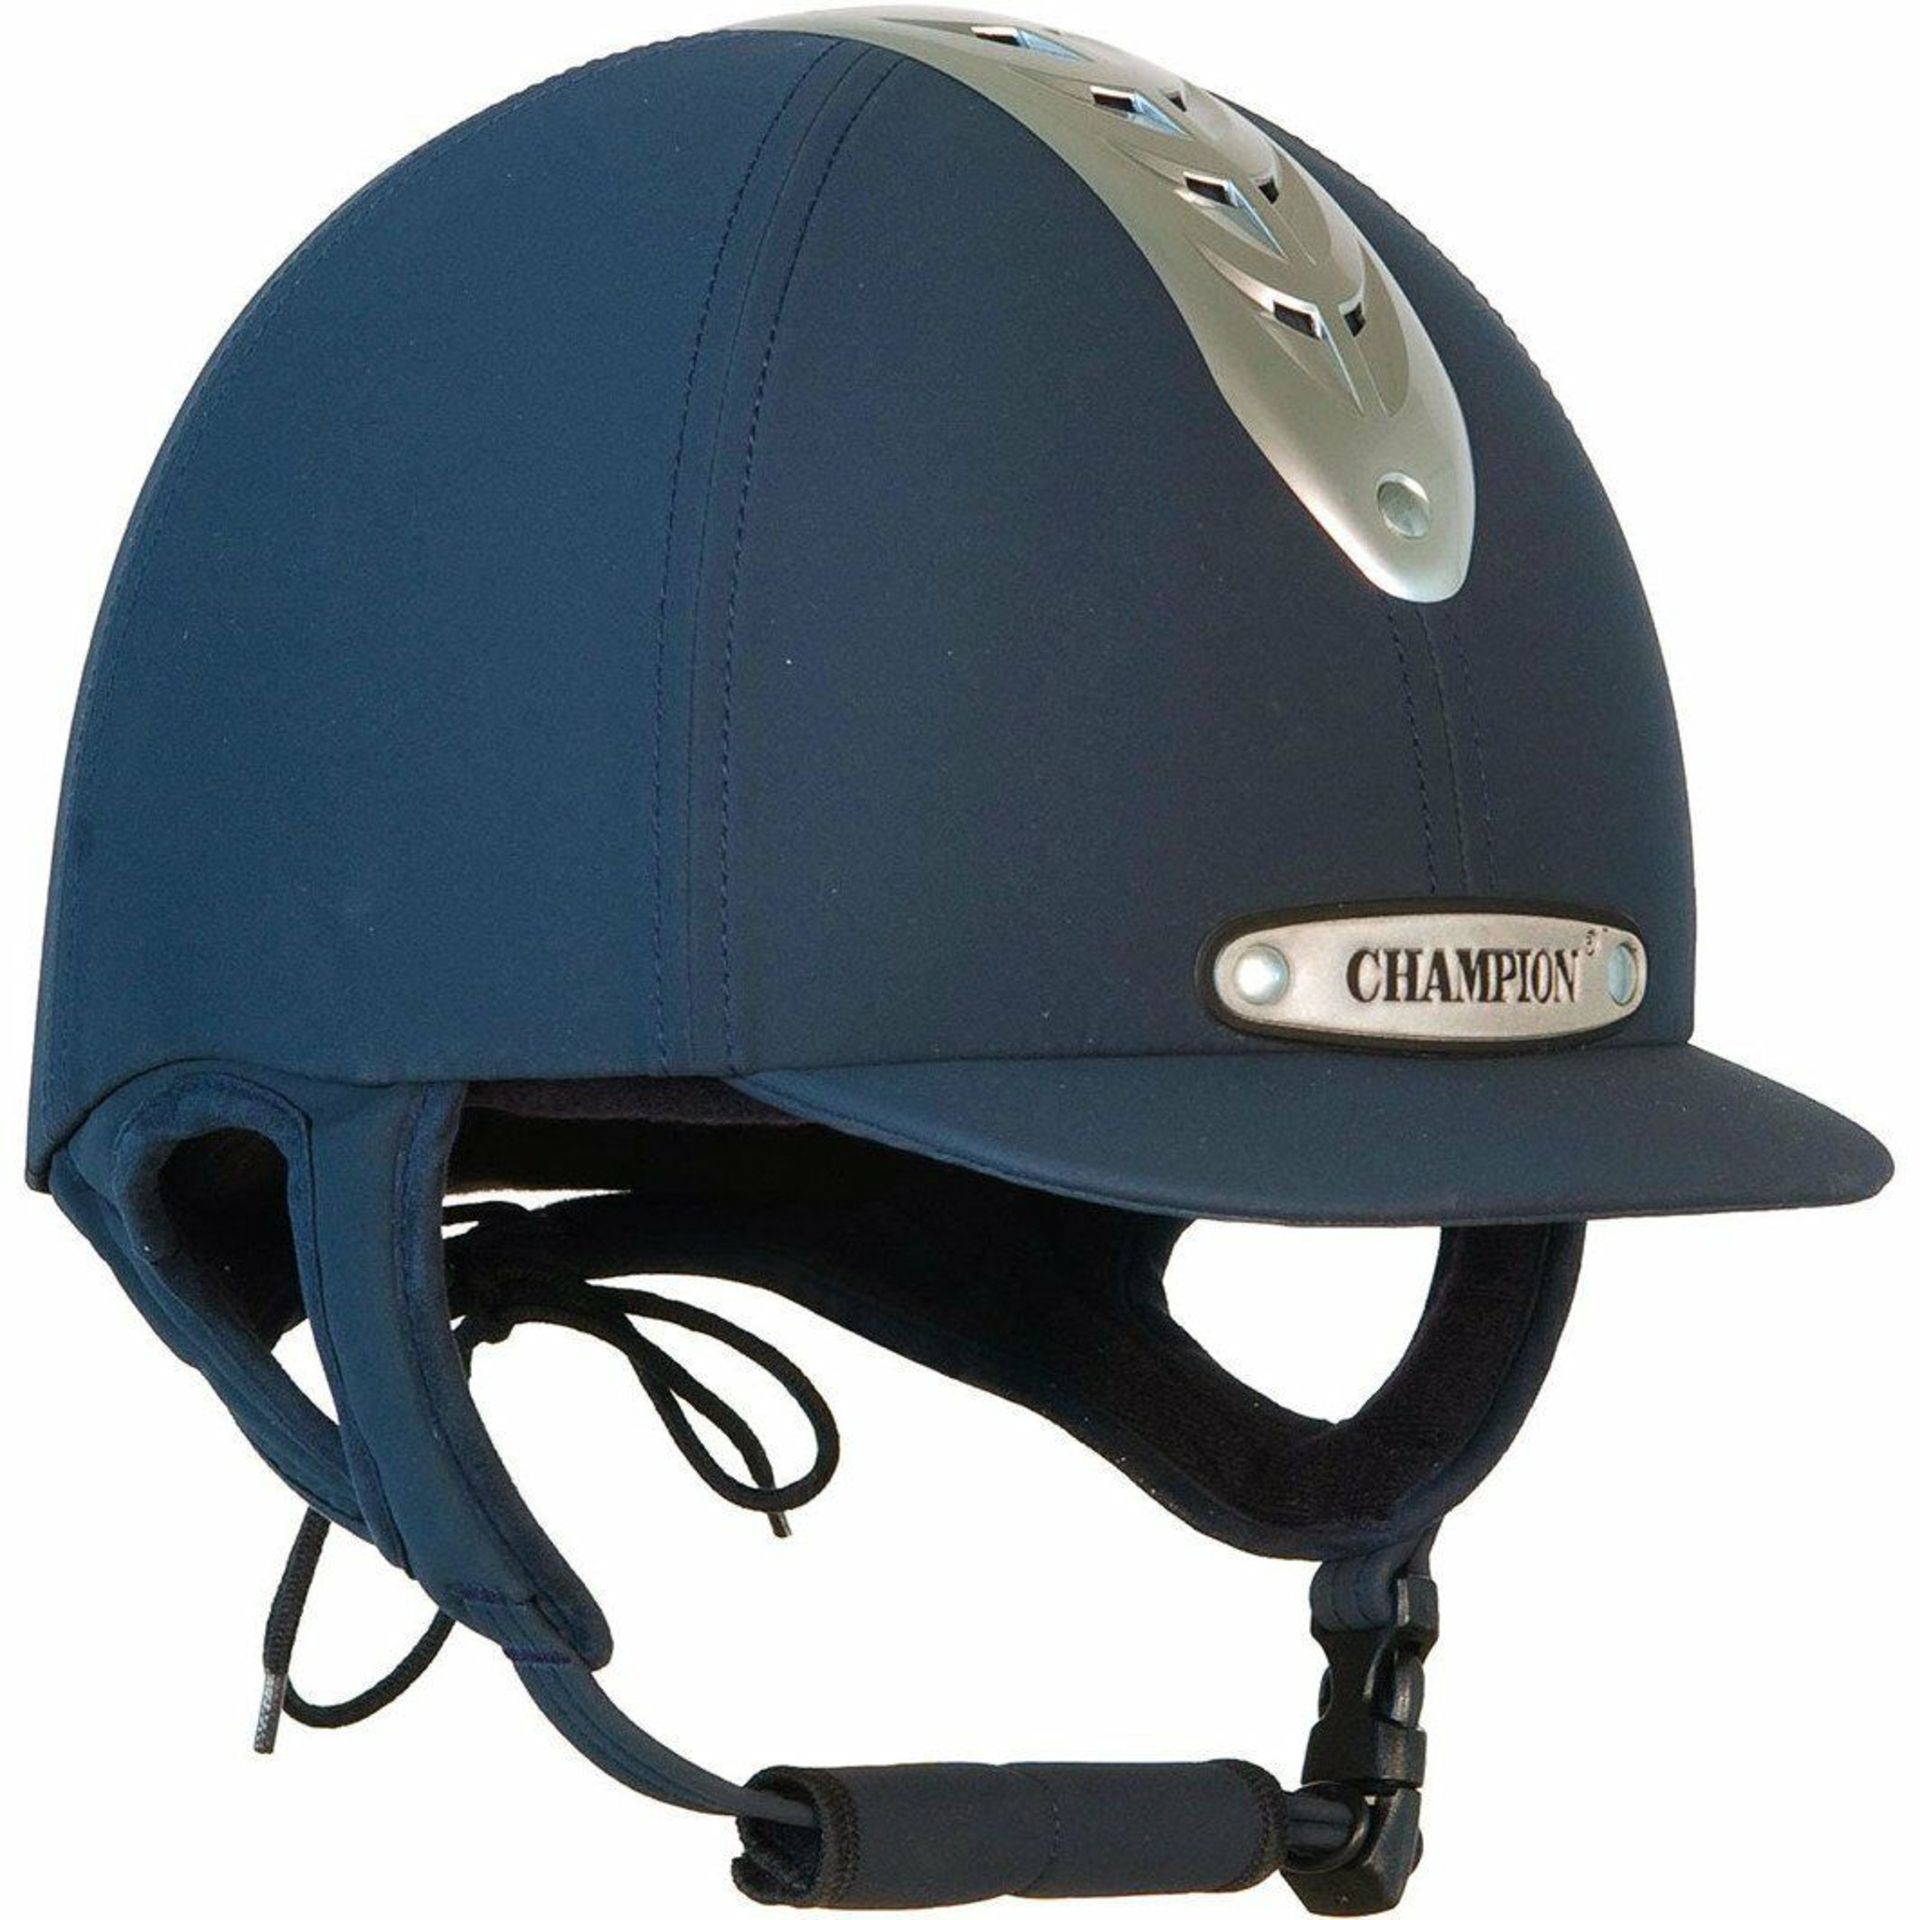 4 x Champion Ventair Evolution Horse Riding Hats - Various Sizes and Colours Included - Unused Boxed